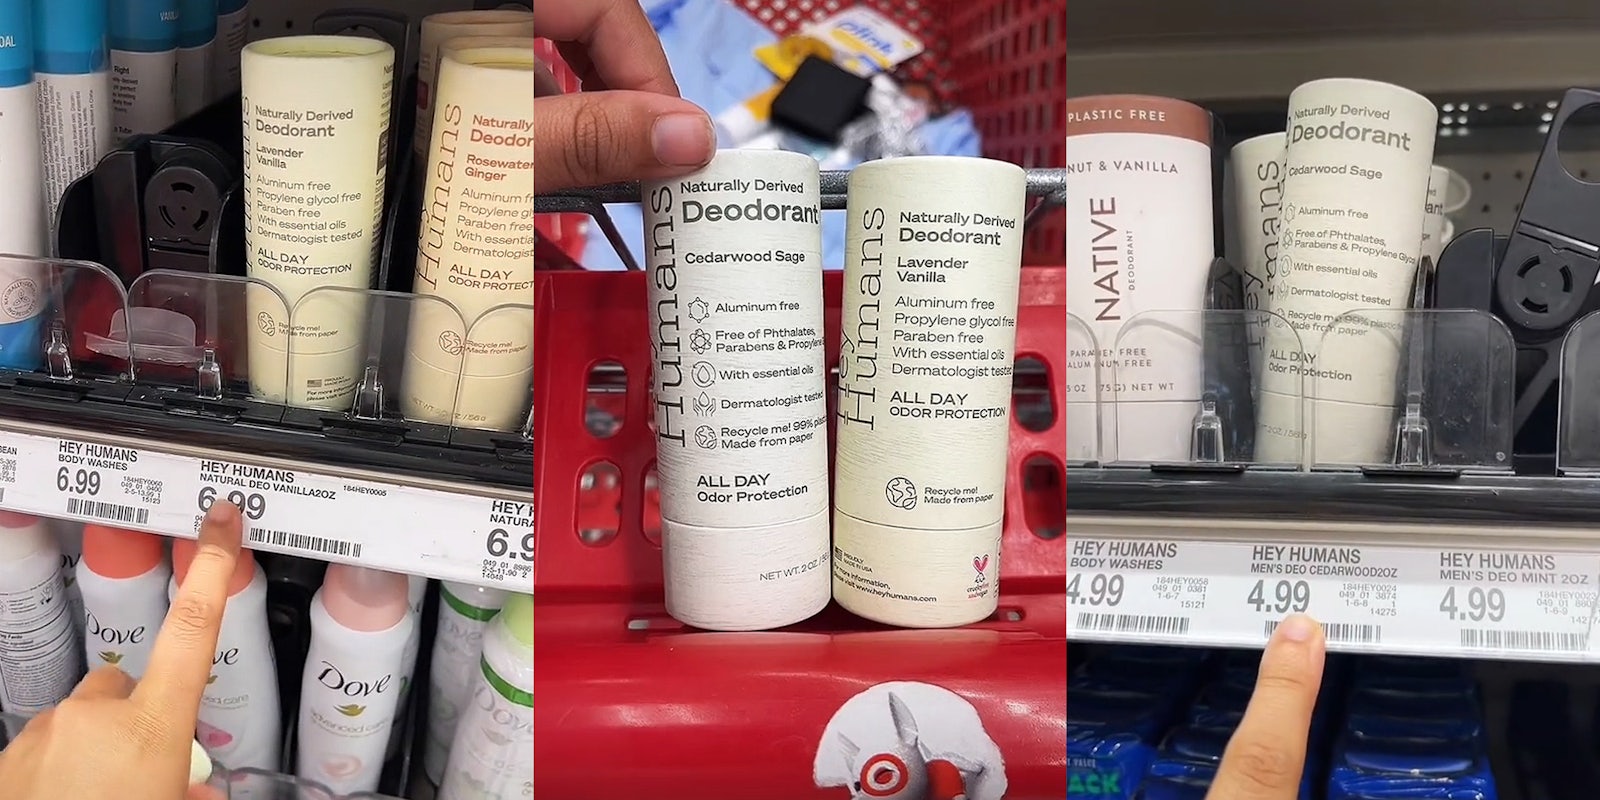 woman finger pointing to female deodorant cost '6.99' at Target (l) Men's and Women's deodorant side by side in cart at Target (c) woman pointing to price of male deodorant '4.99' (r)